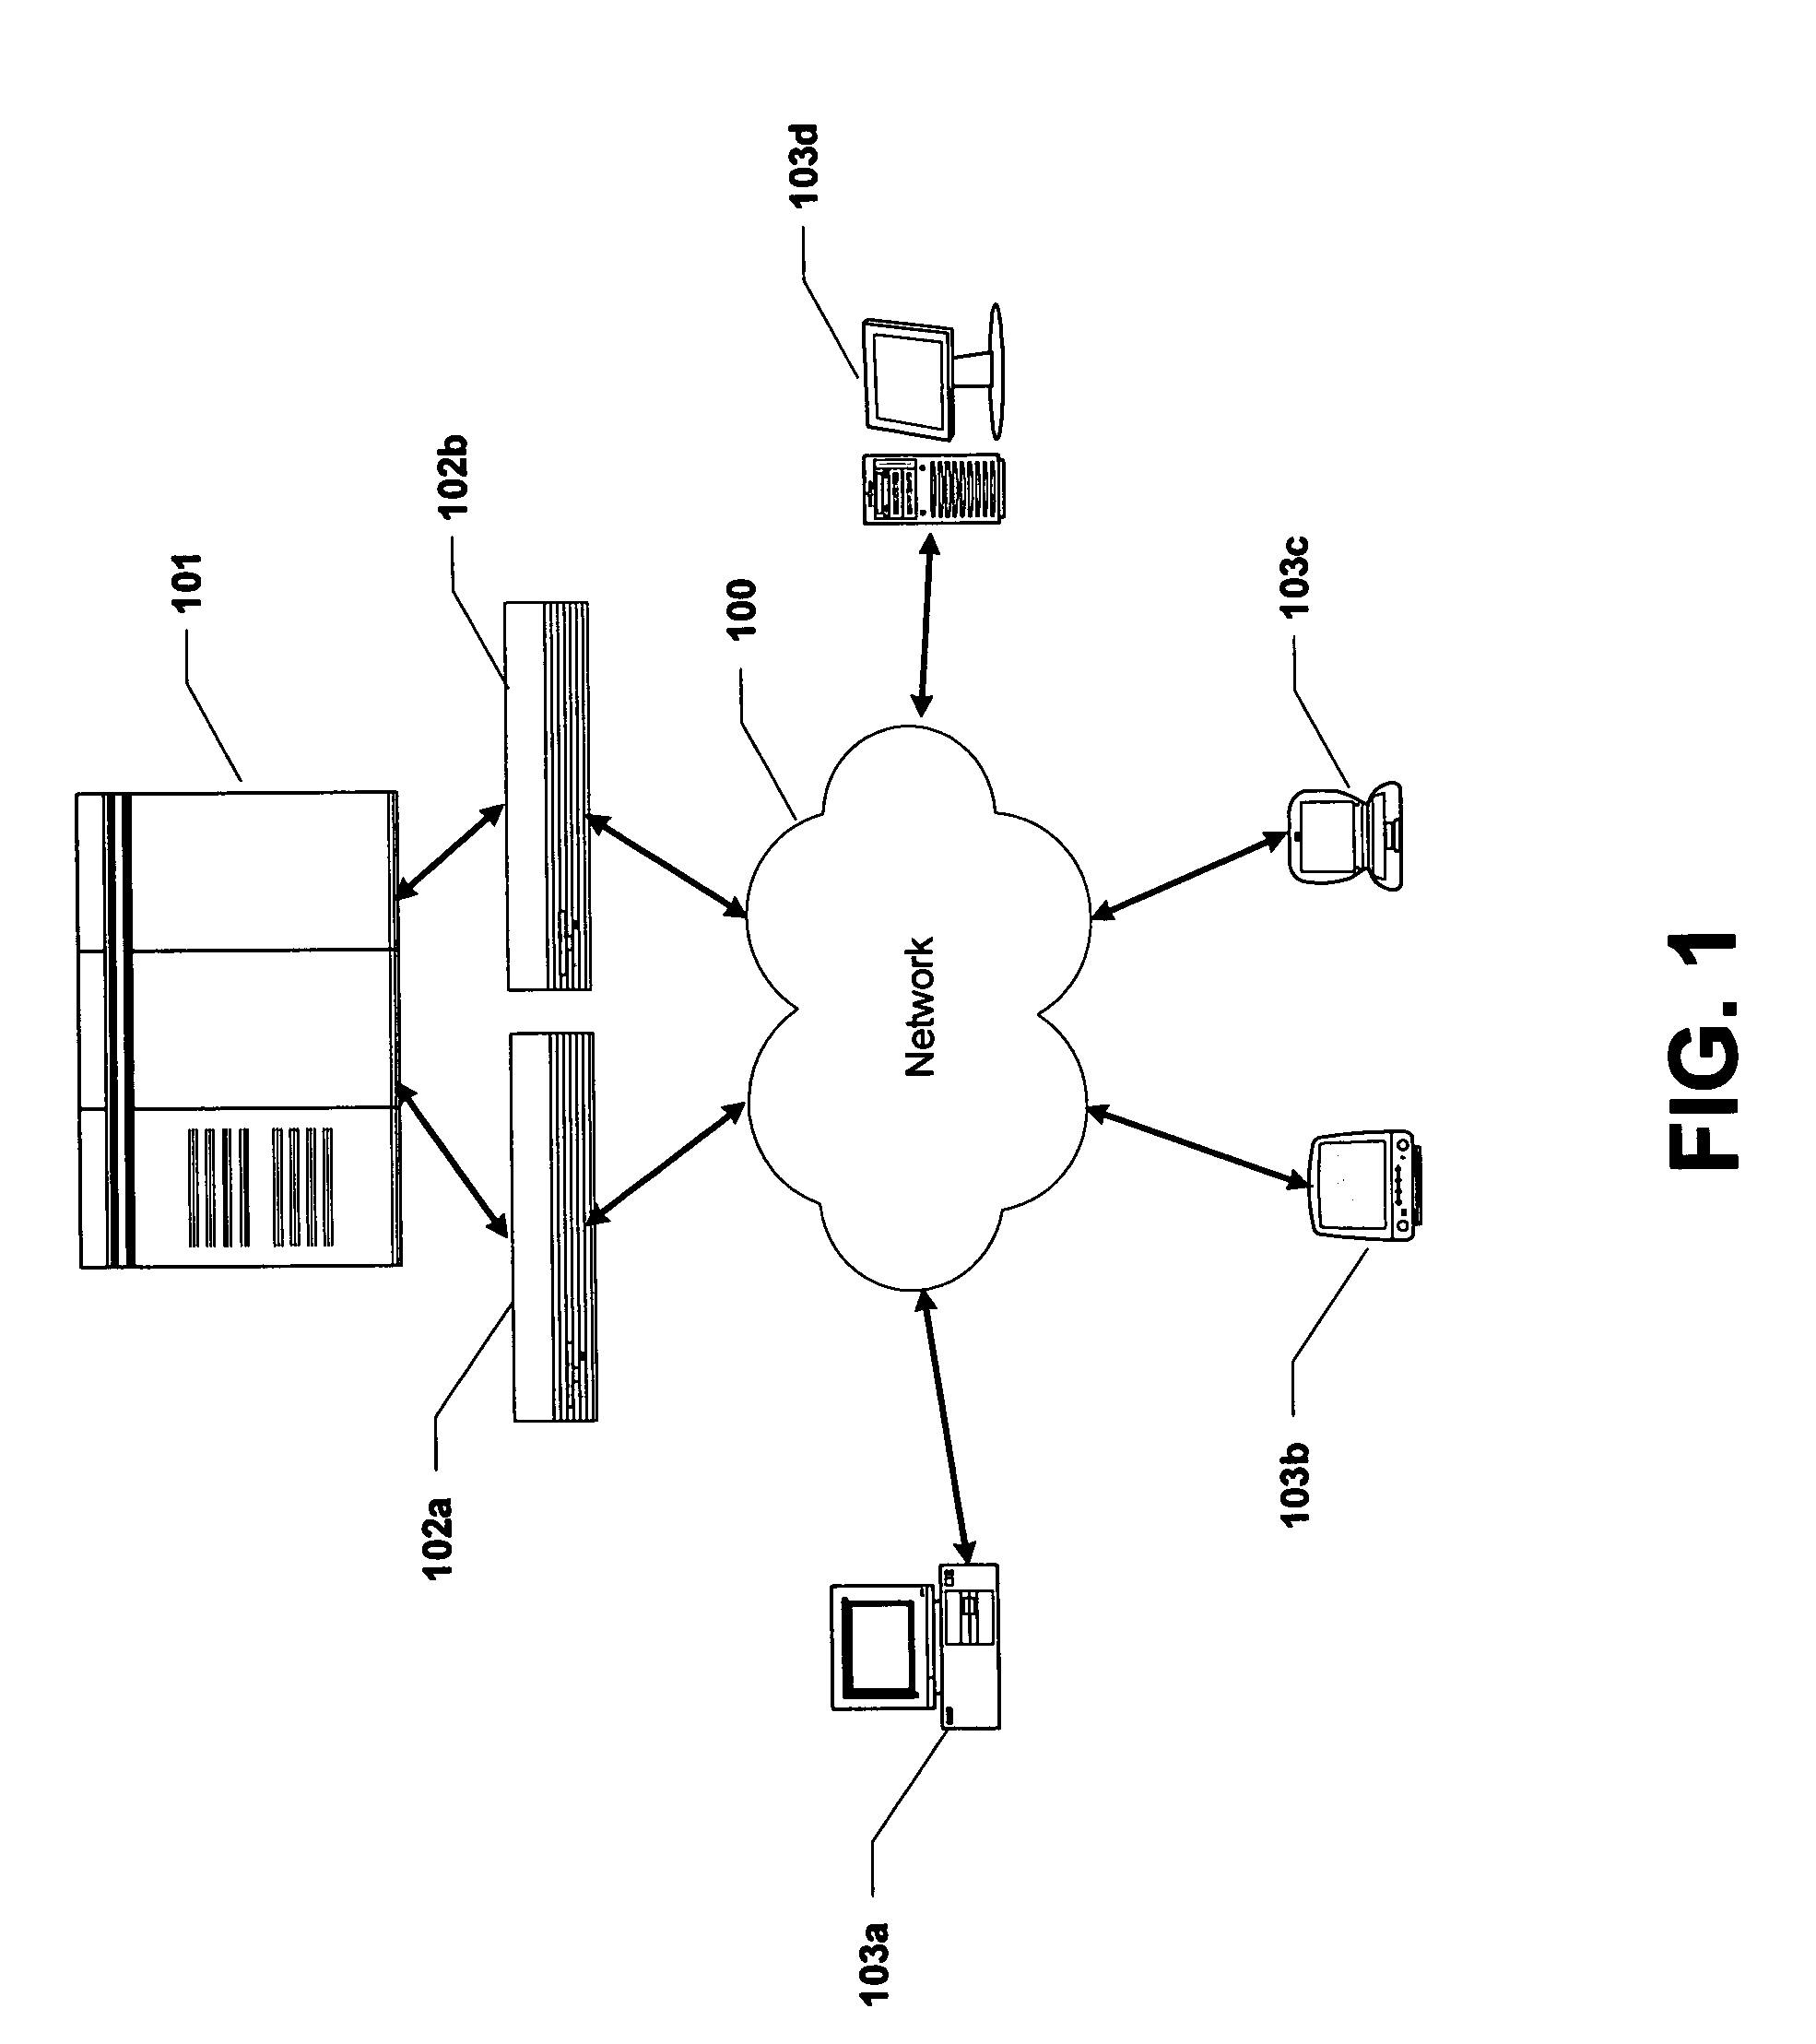 System and method for providing dynamic network firewall with default deny